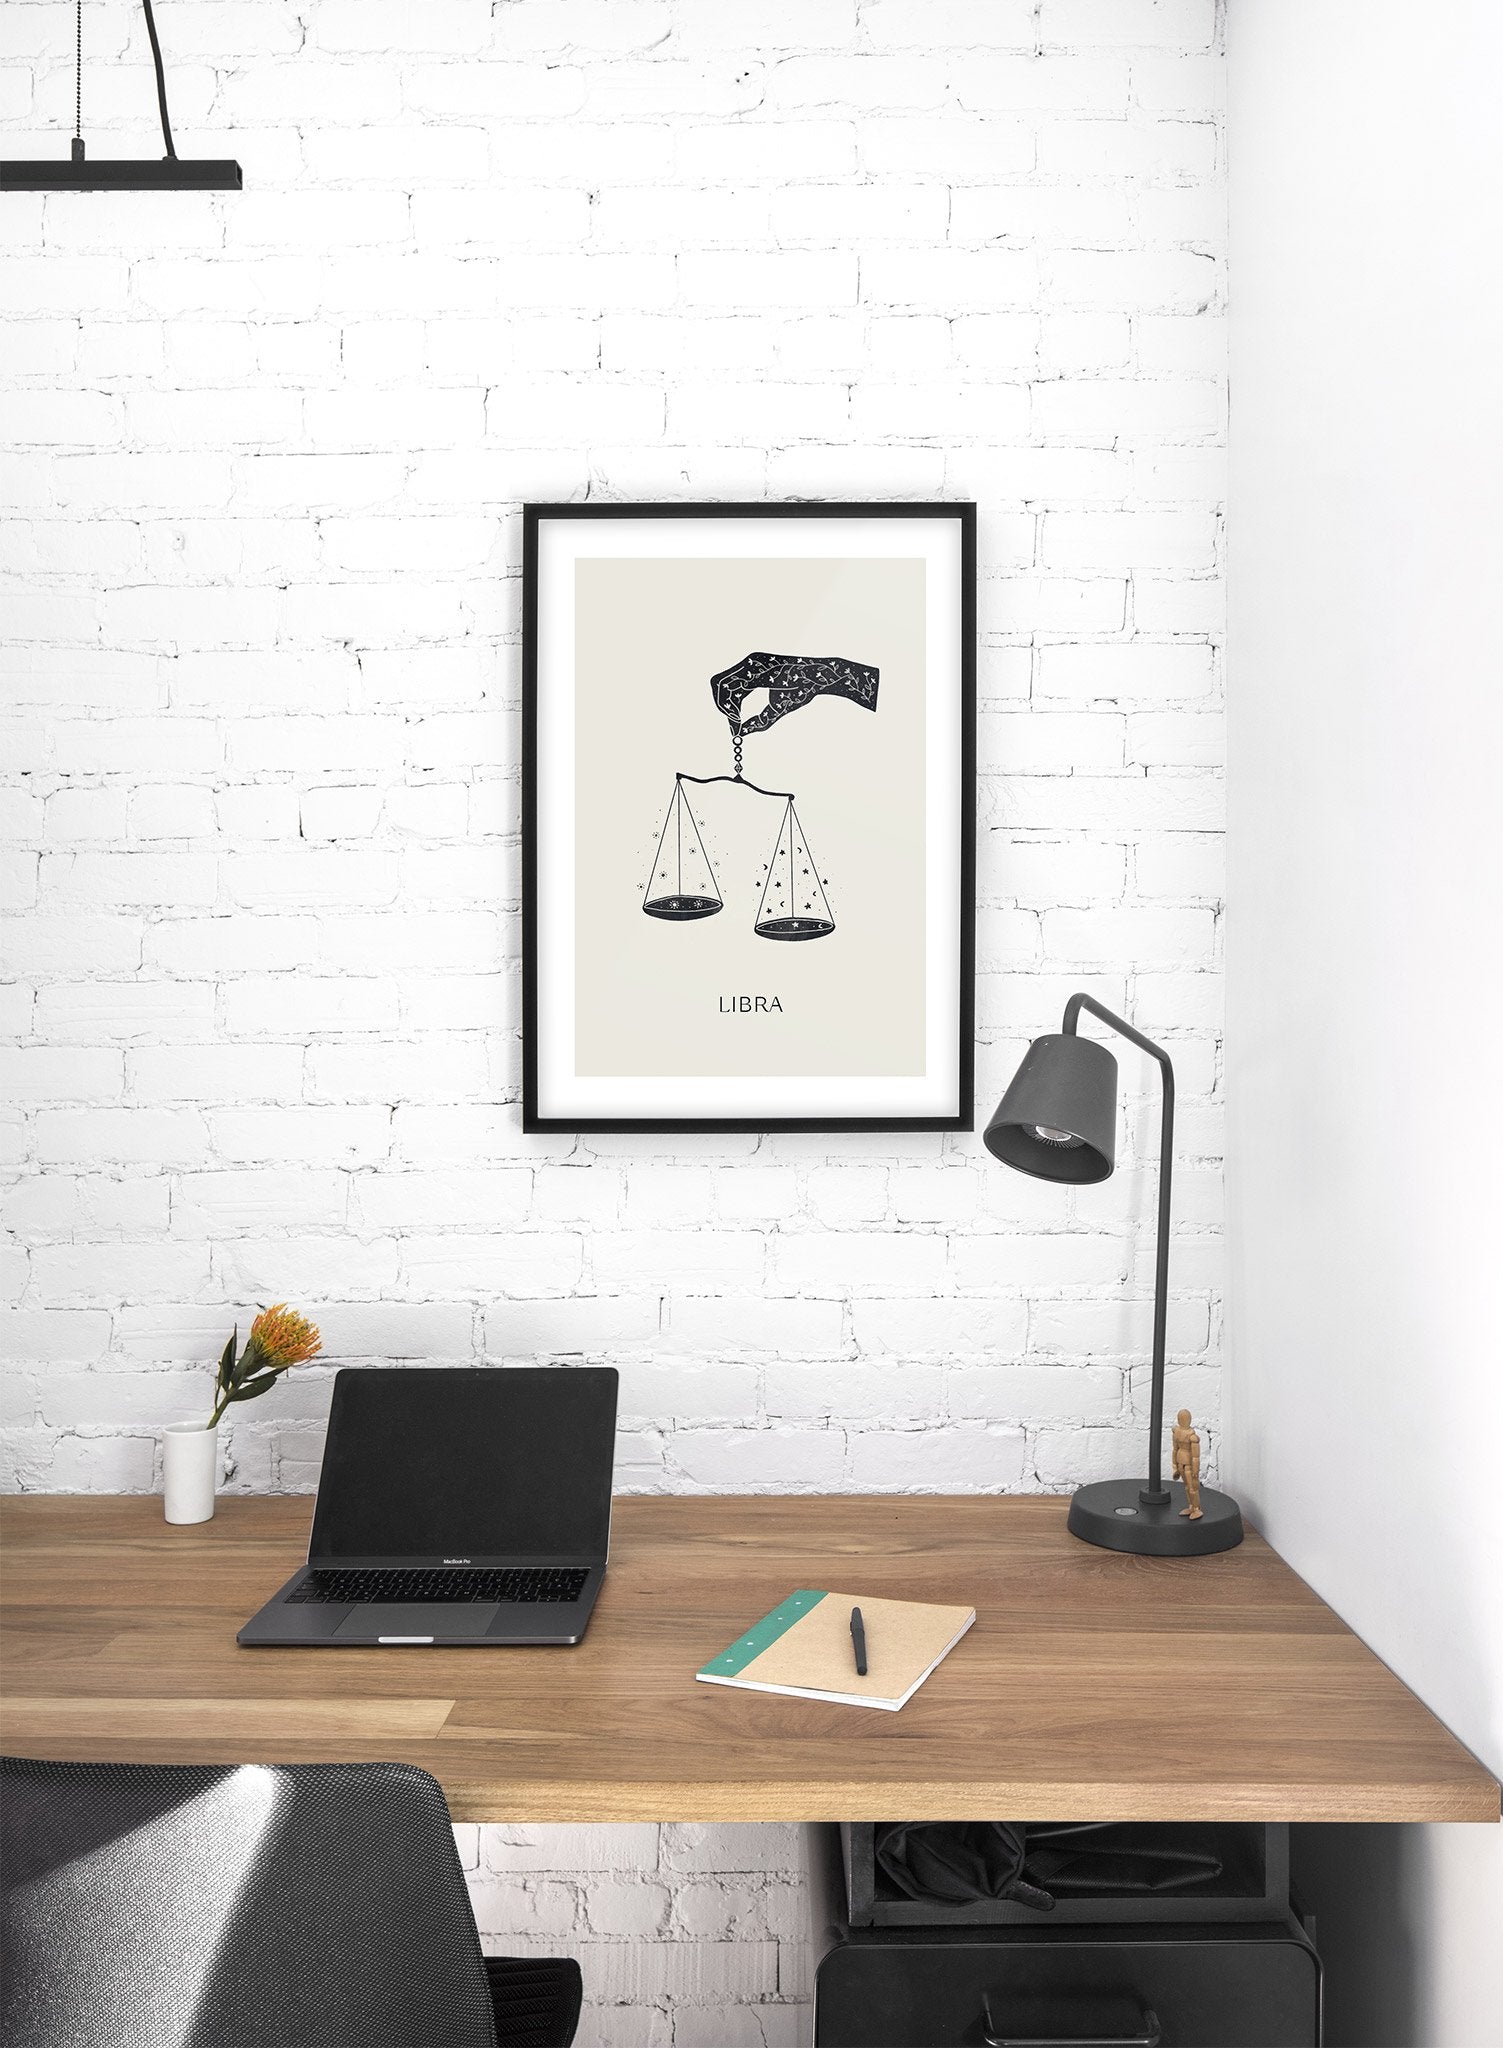 Celestial illustration poster by Opposite Wall with horoscope zodiac symbol of Libra - Lifestyle - Office Desk